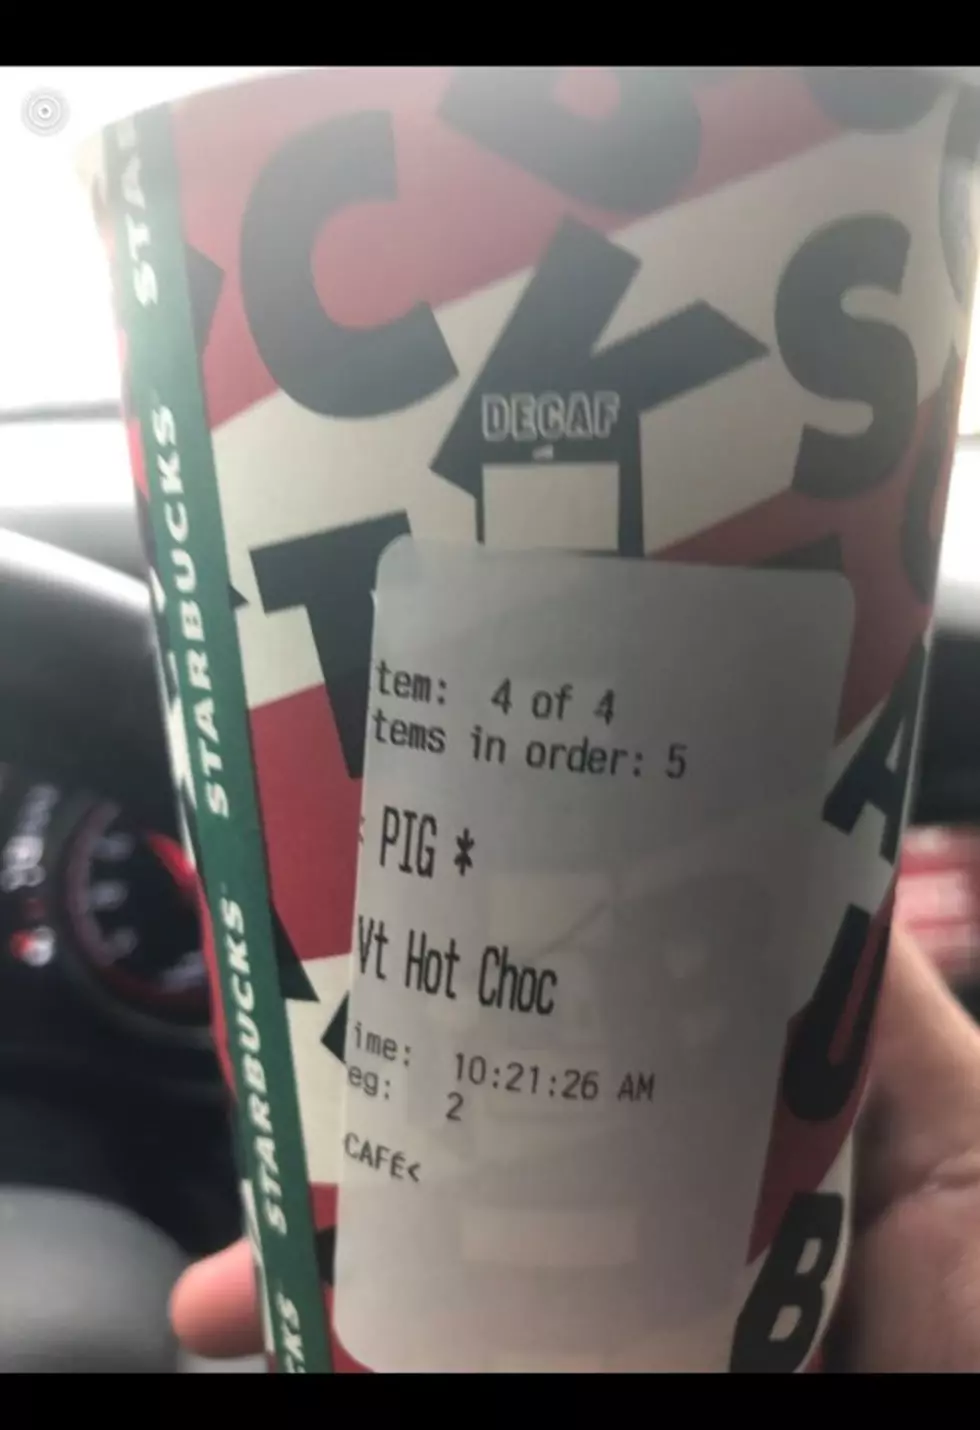 Oklahoma Officer Gets a Starbucks Cup With the Word ‘Pig’ on It